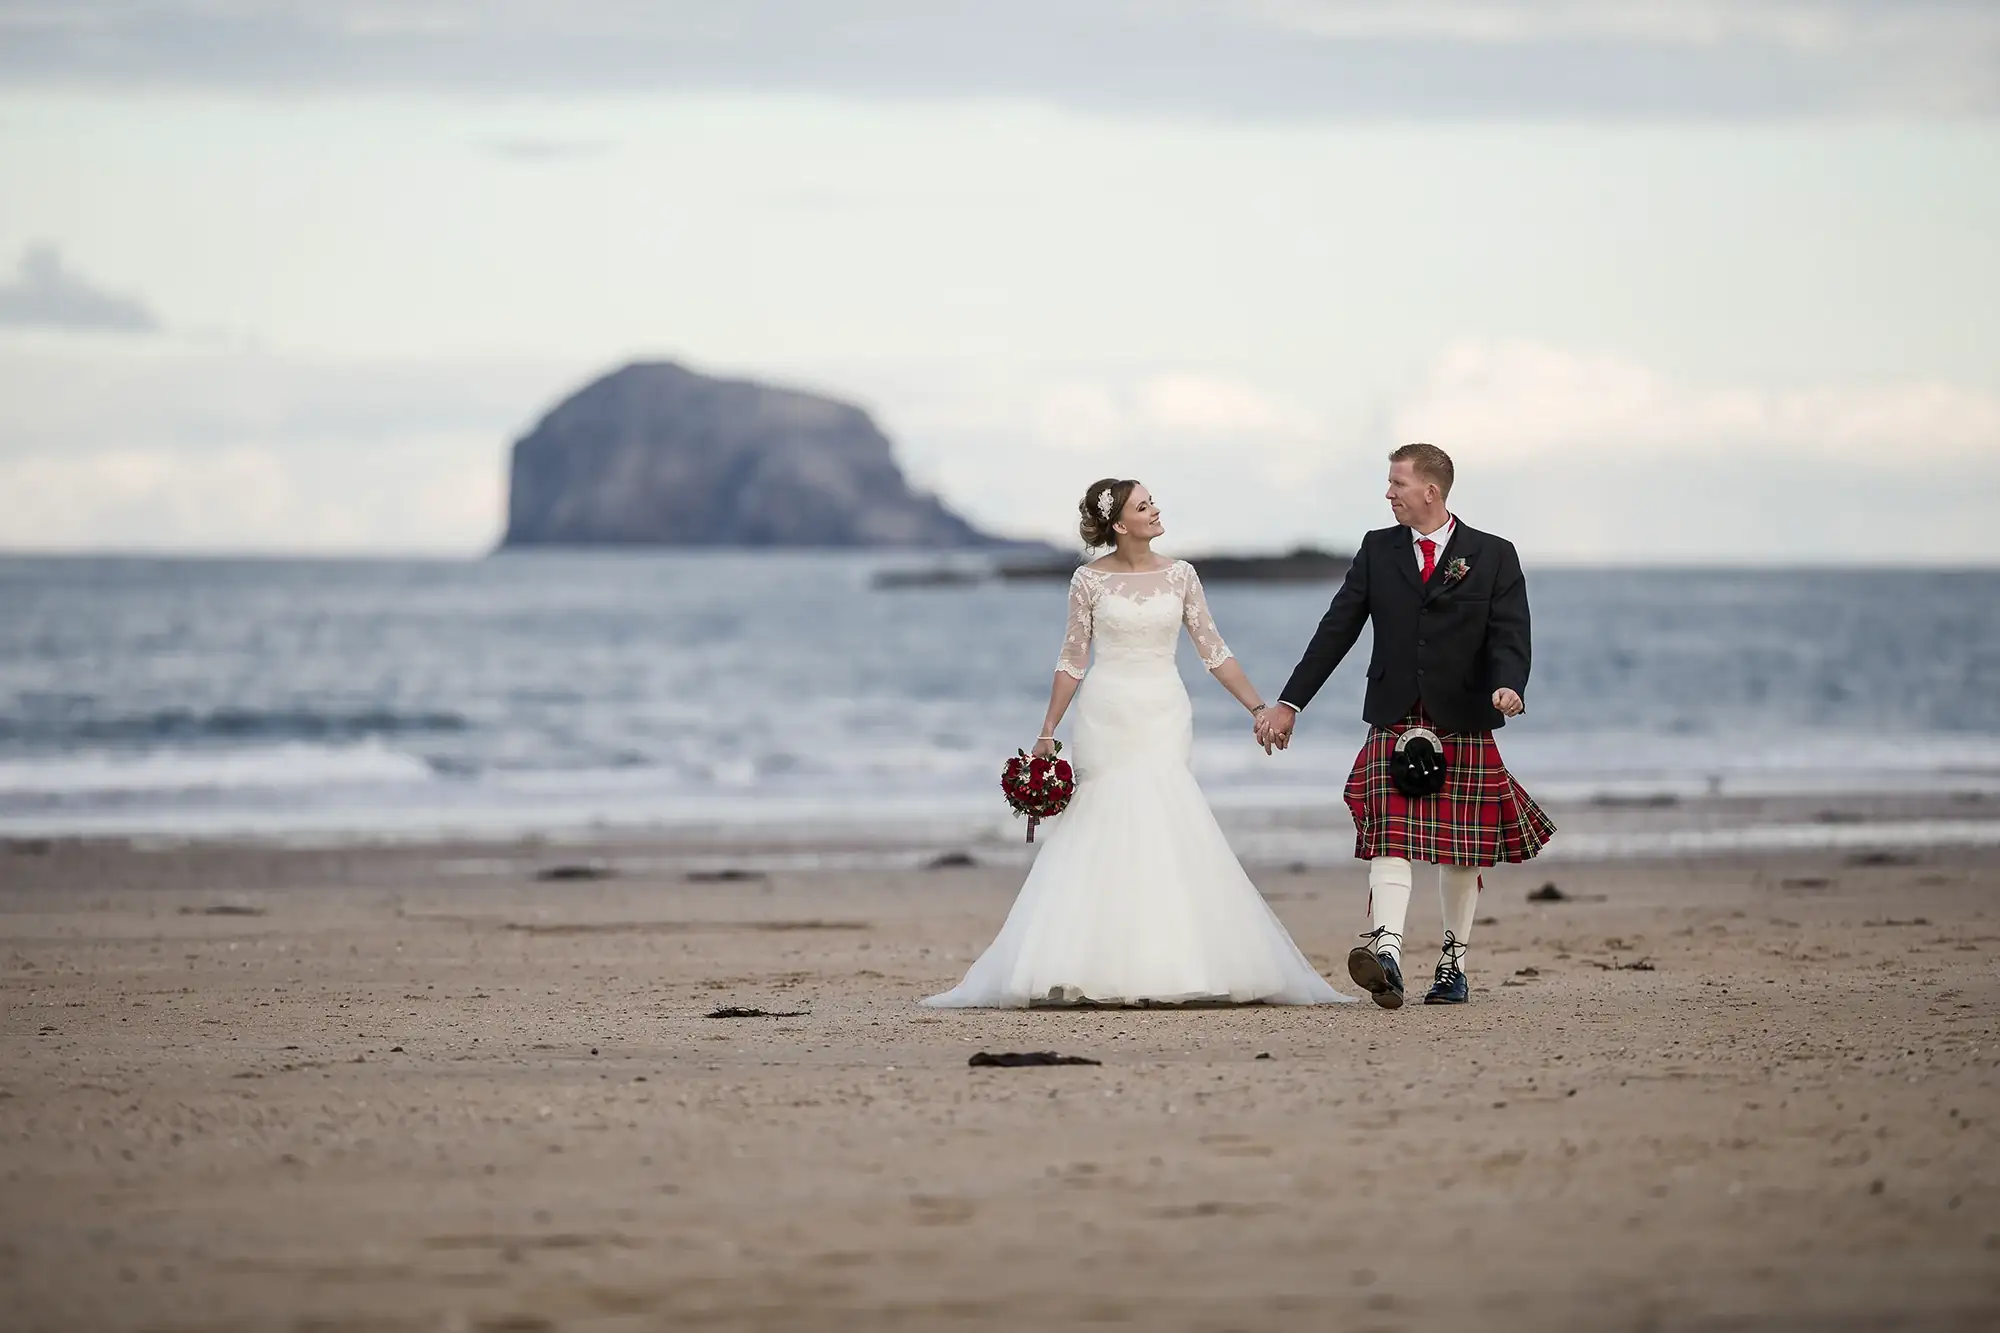 A bride in a white dress and a groom in a kilt hold hands on a beach, with a large rock formation in the distant sea behind them.